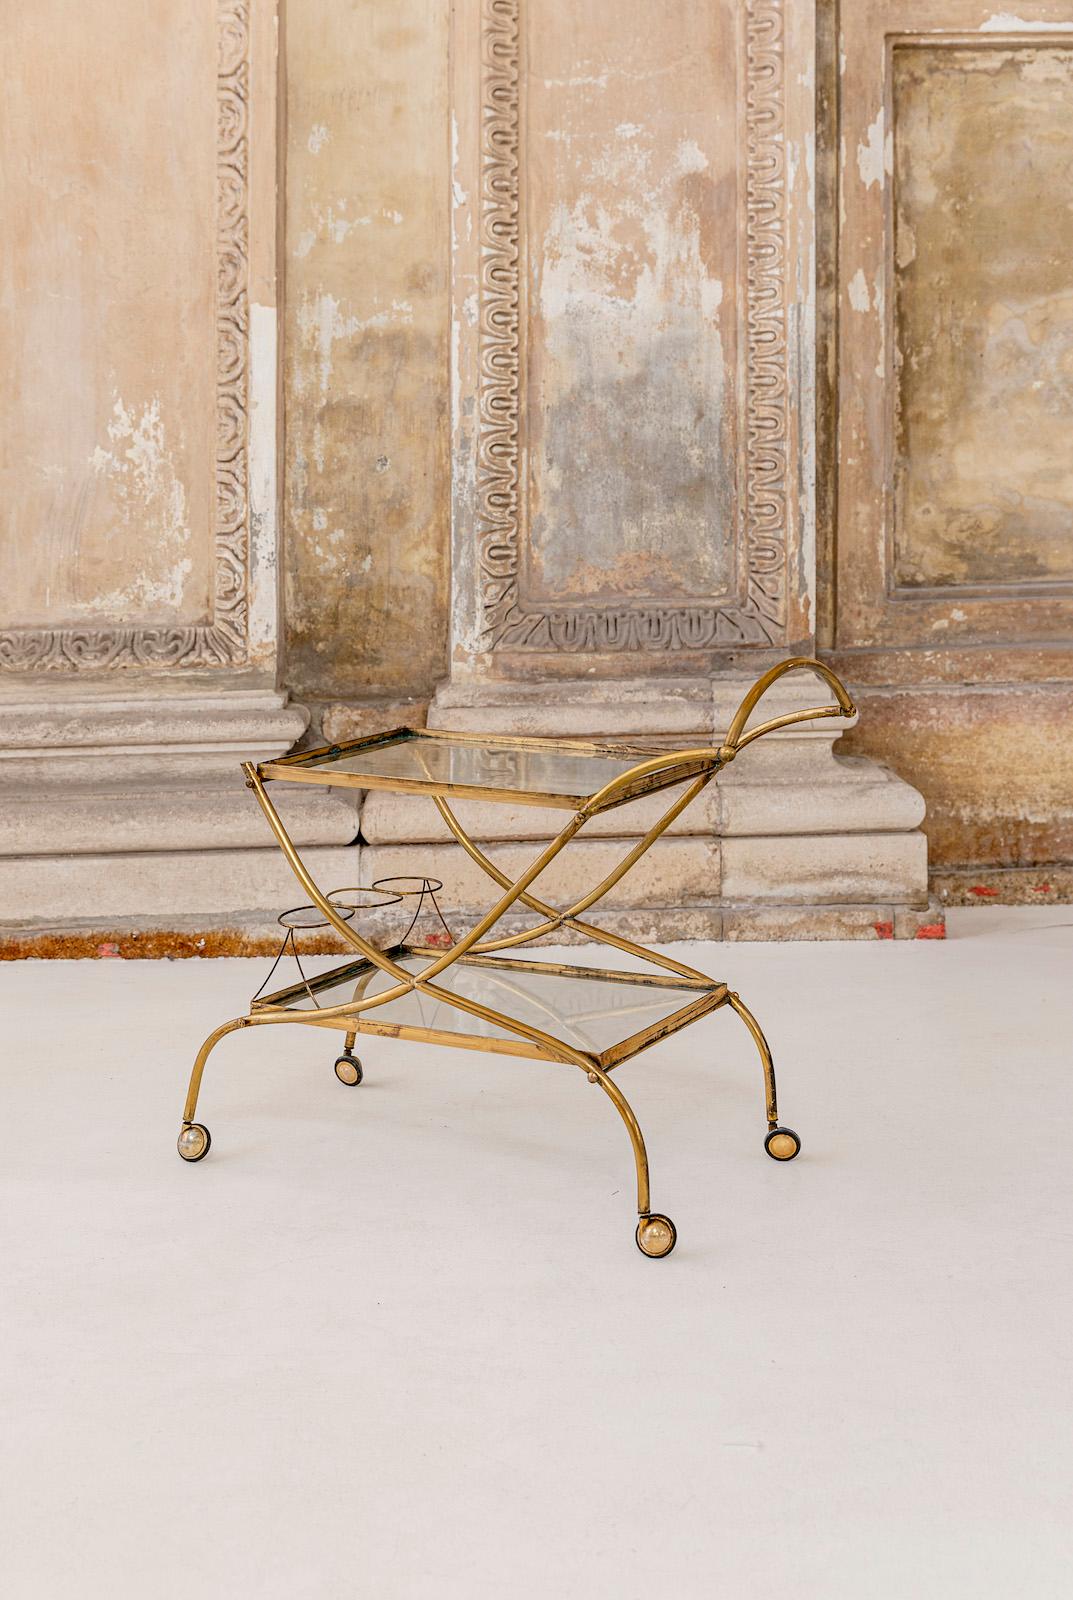 Stunning shaped brass and glass bar cart.
Two tiers, bottle holder.